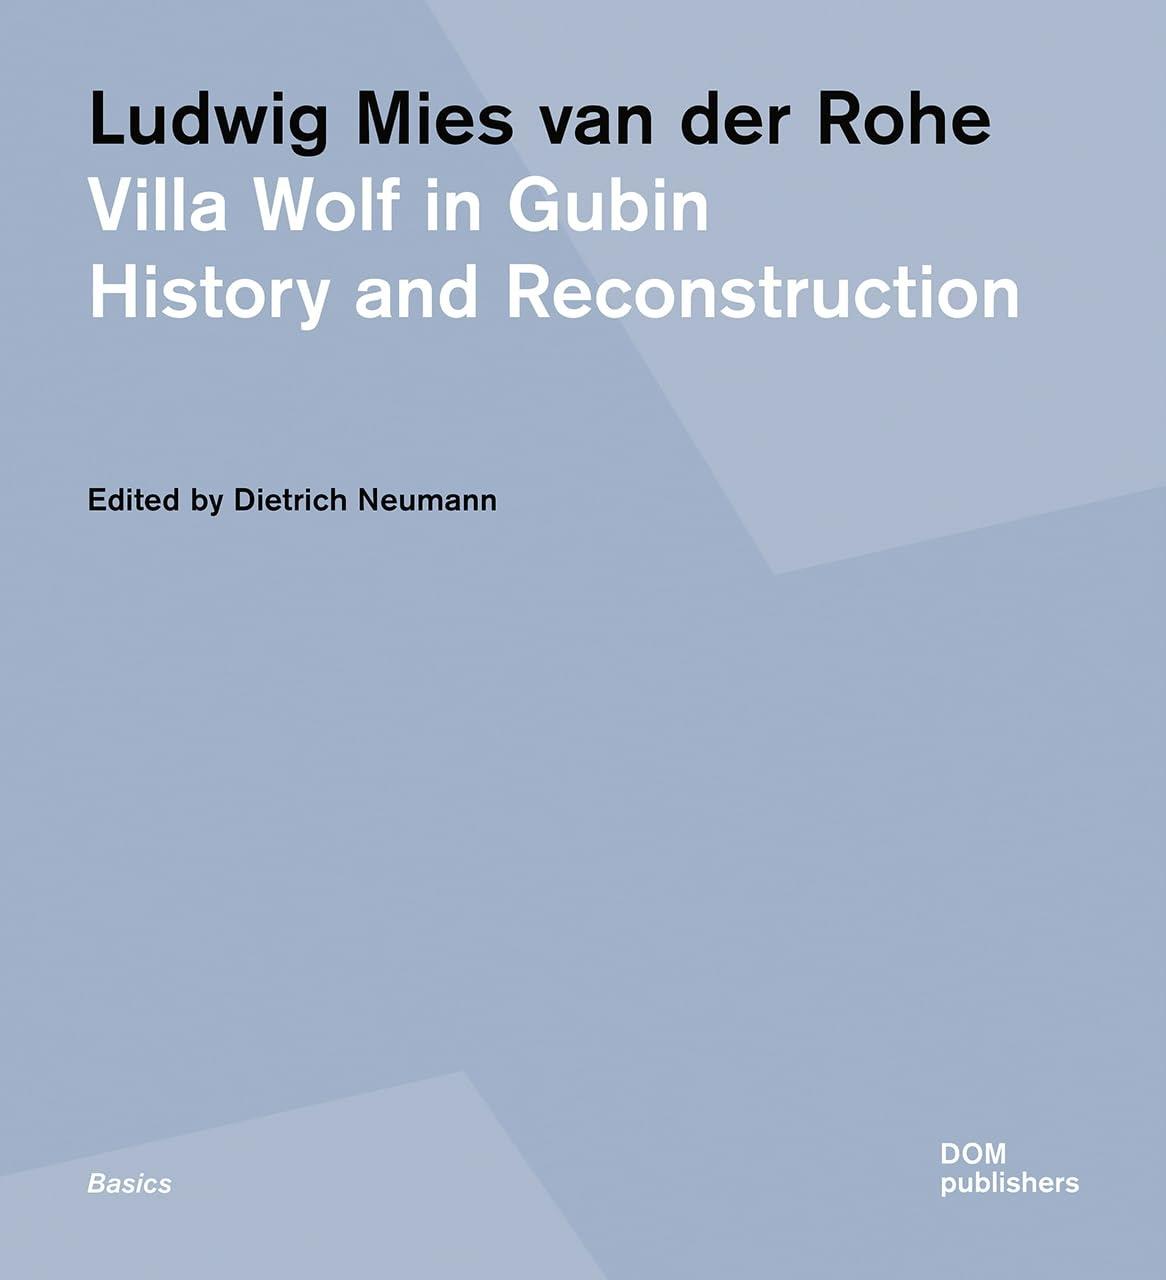 LUDWIG MIES VAN DER ROHE VILLA WOLF IN GUBIN:HISTORY AND RECONSTRUCTION. 